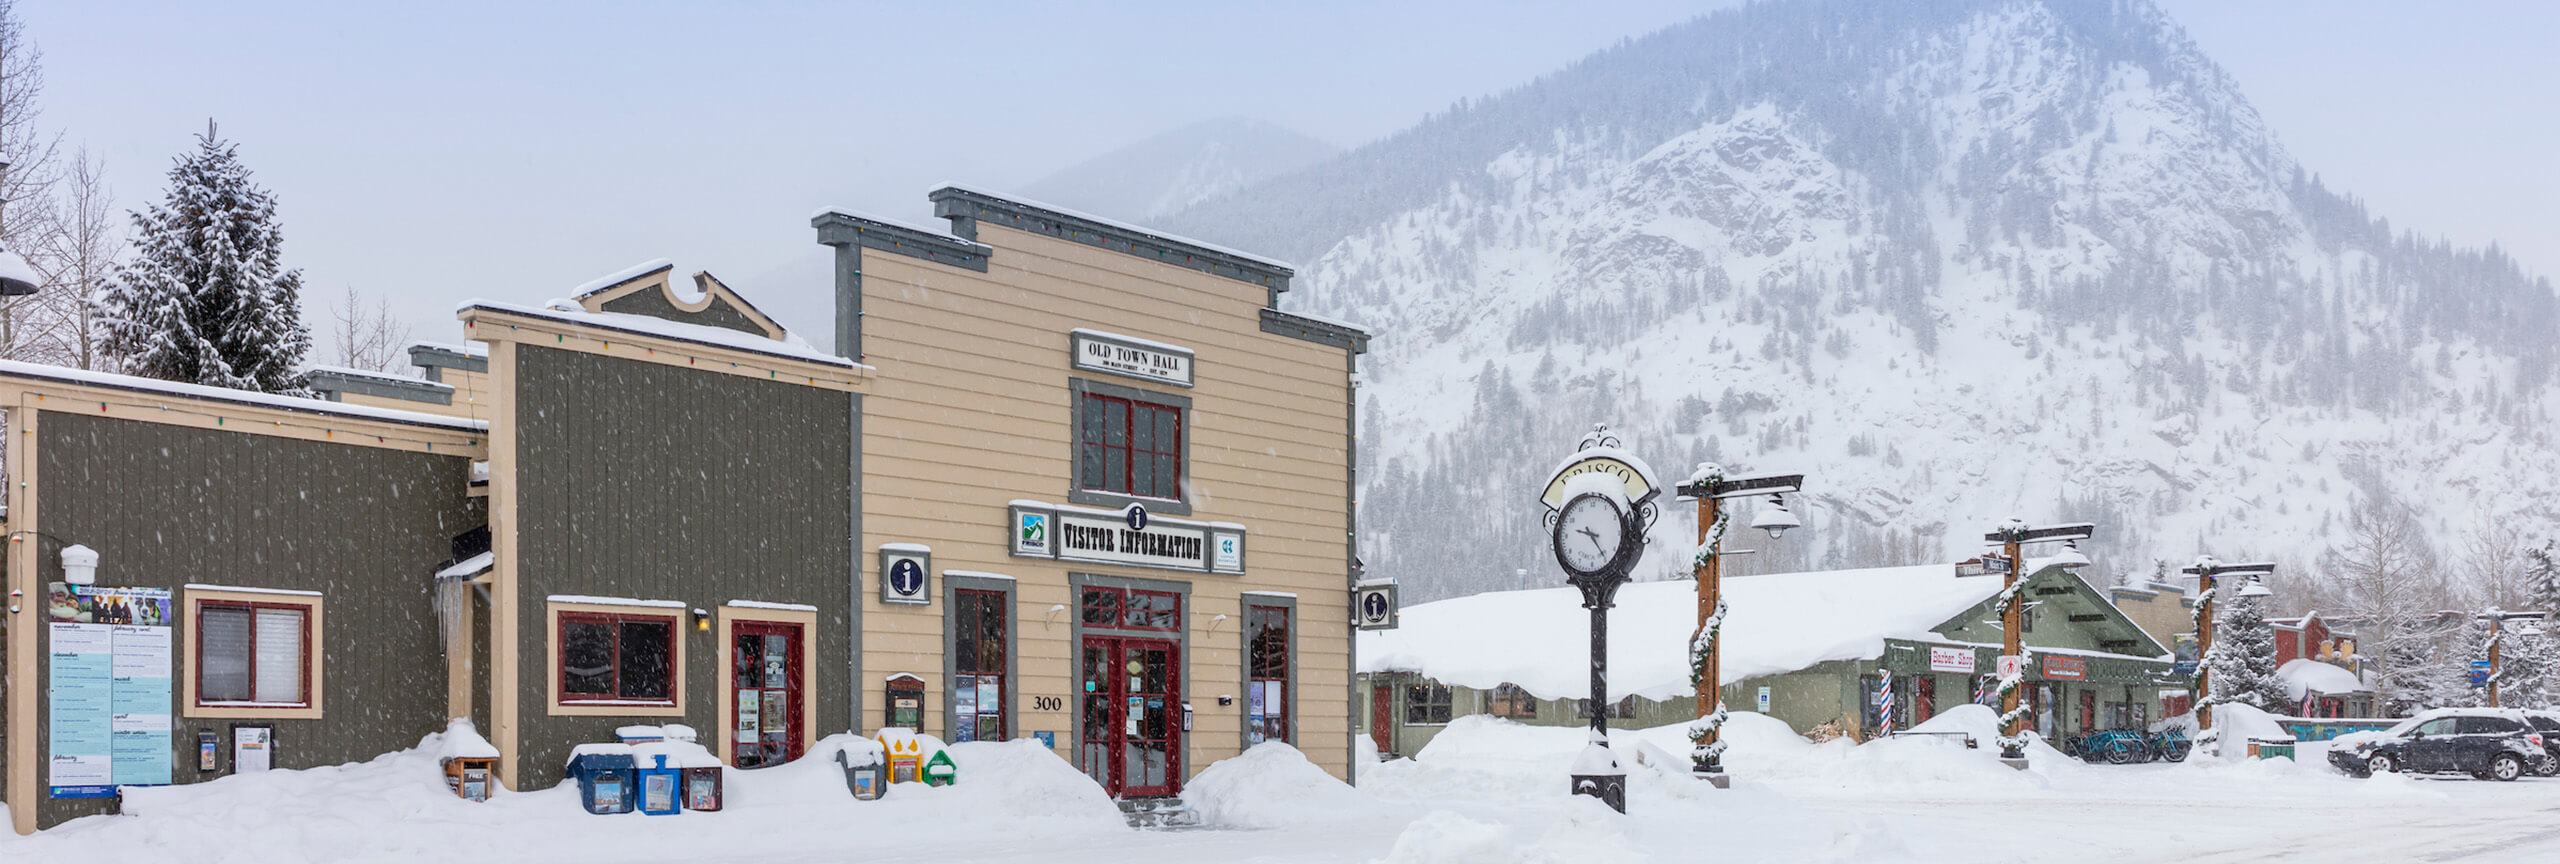 Frisco Main Street and Info Center with snow